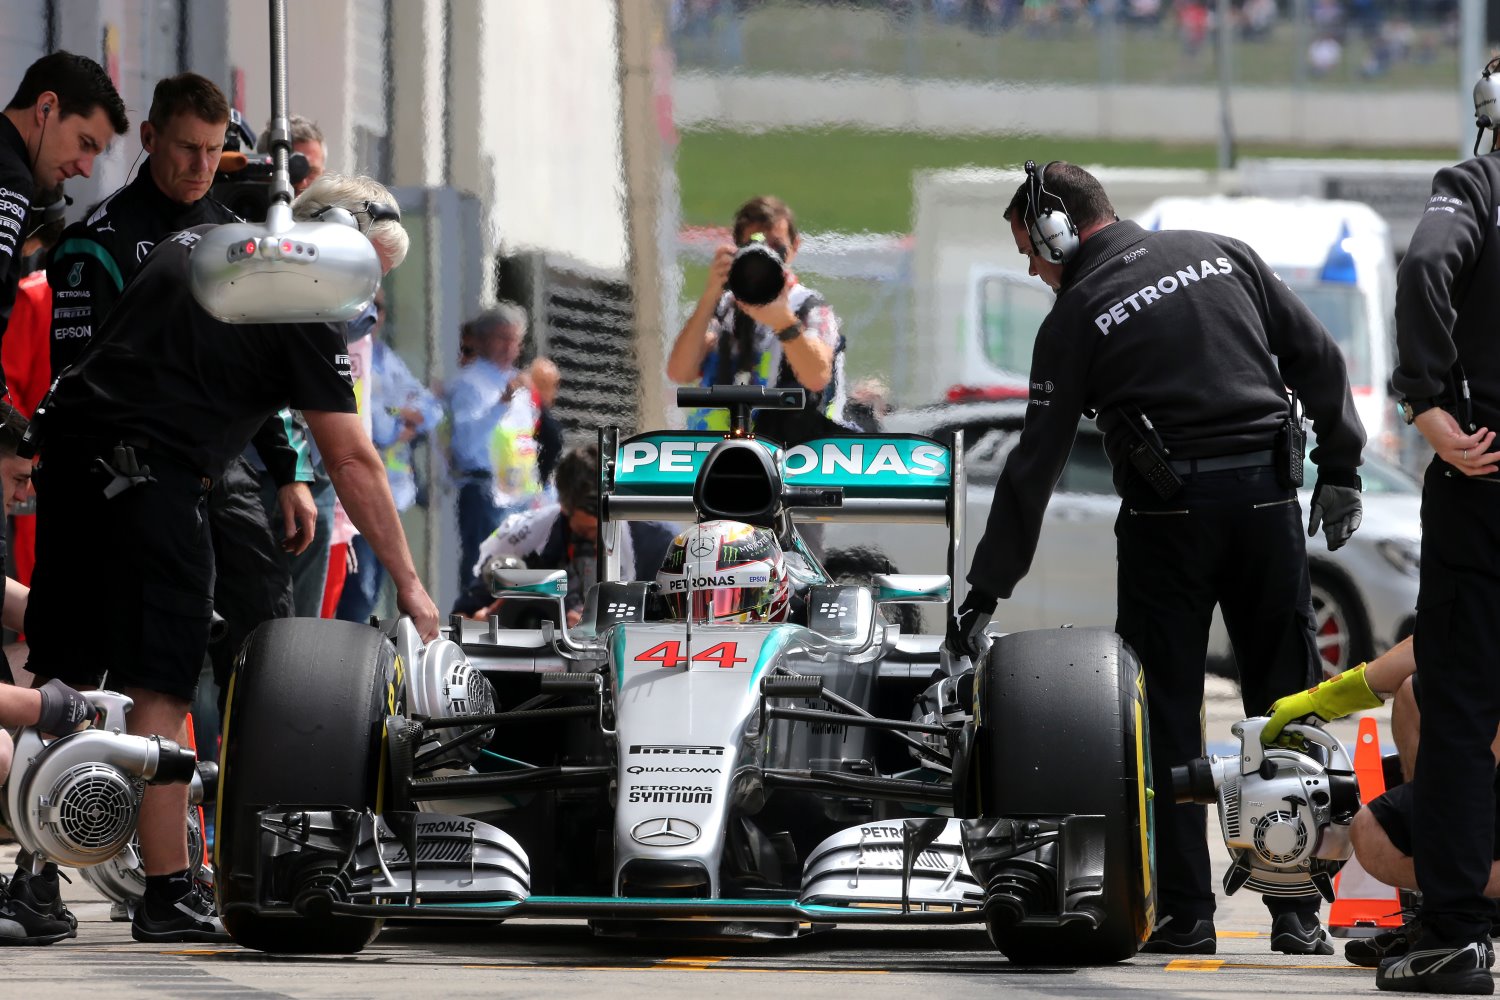 Mercedes is tro blame for F1 boredom - they pushed for the complicated and expensive engine formula